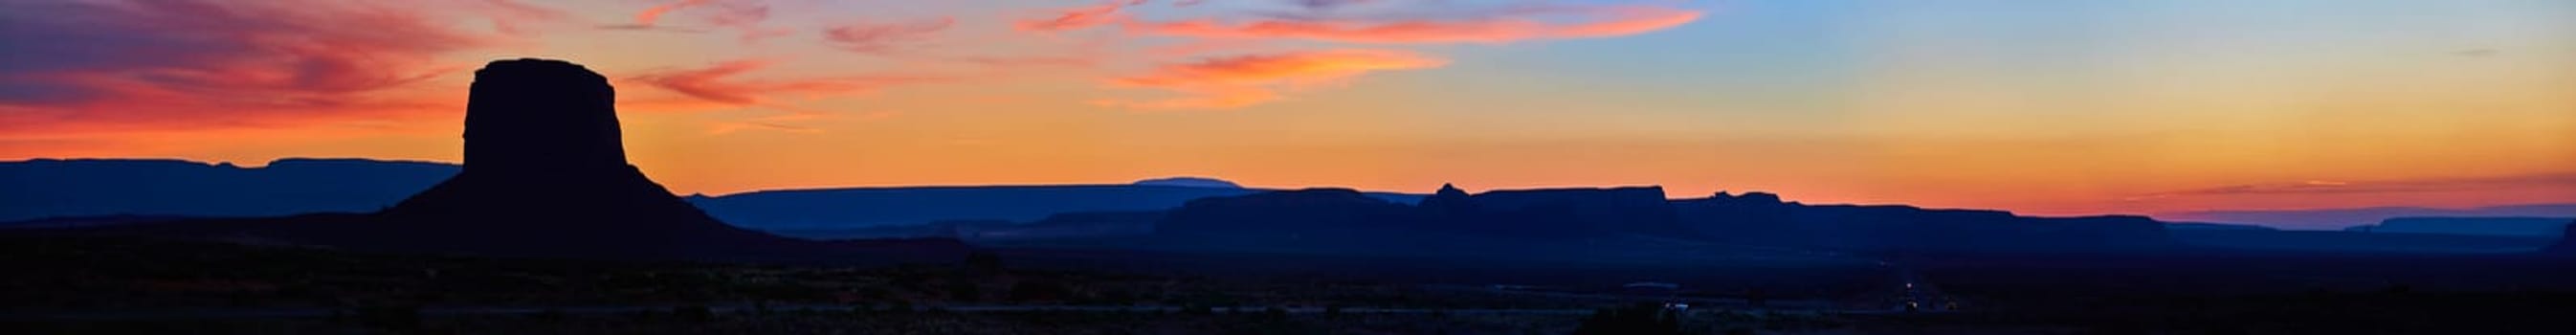 Golden Hour Butte Silhouette in Sedona, 2016 - Panoramic view of an isolated butte against a vibrant sunset sky in Arizona's desert wilderness